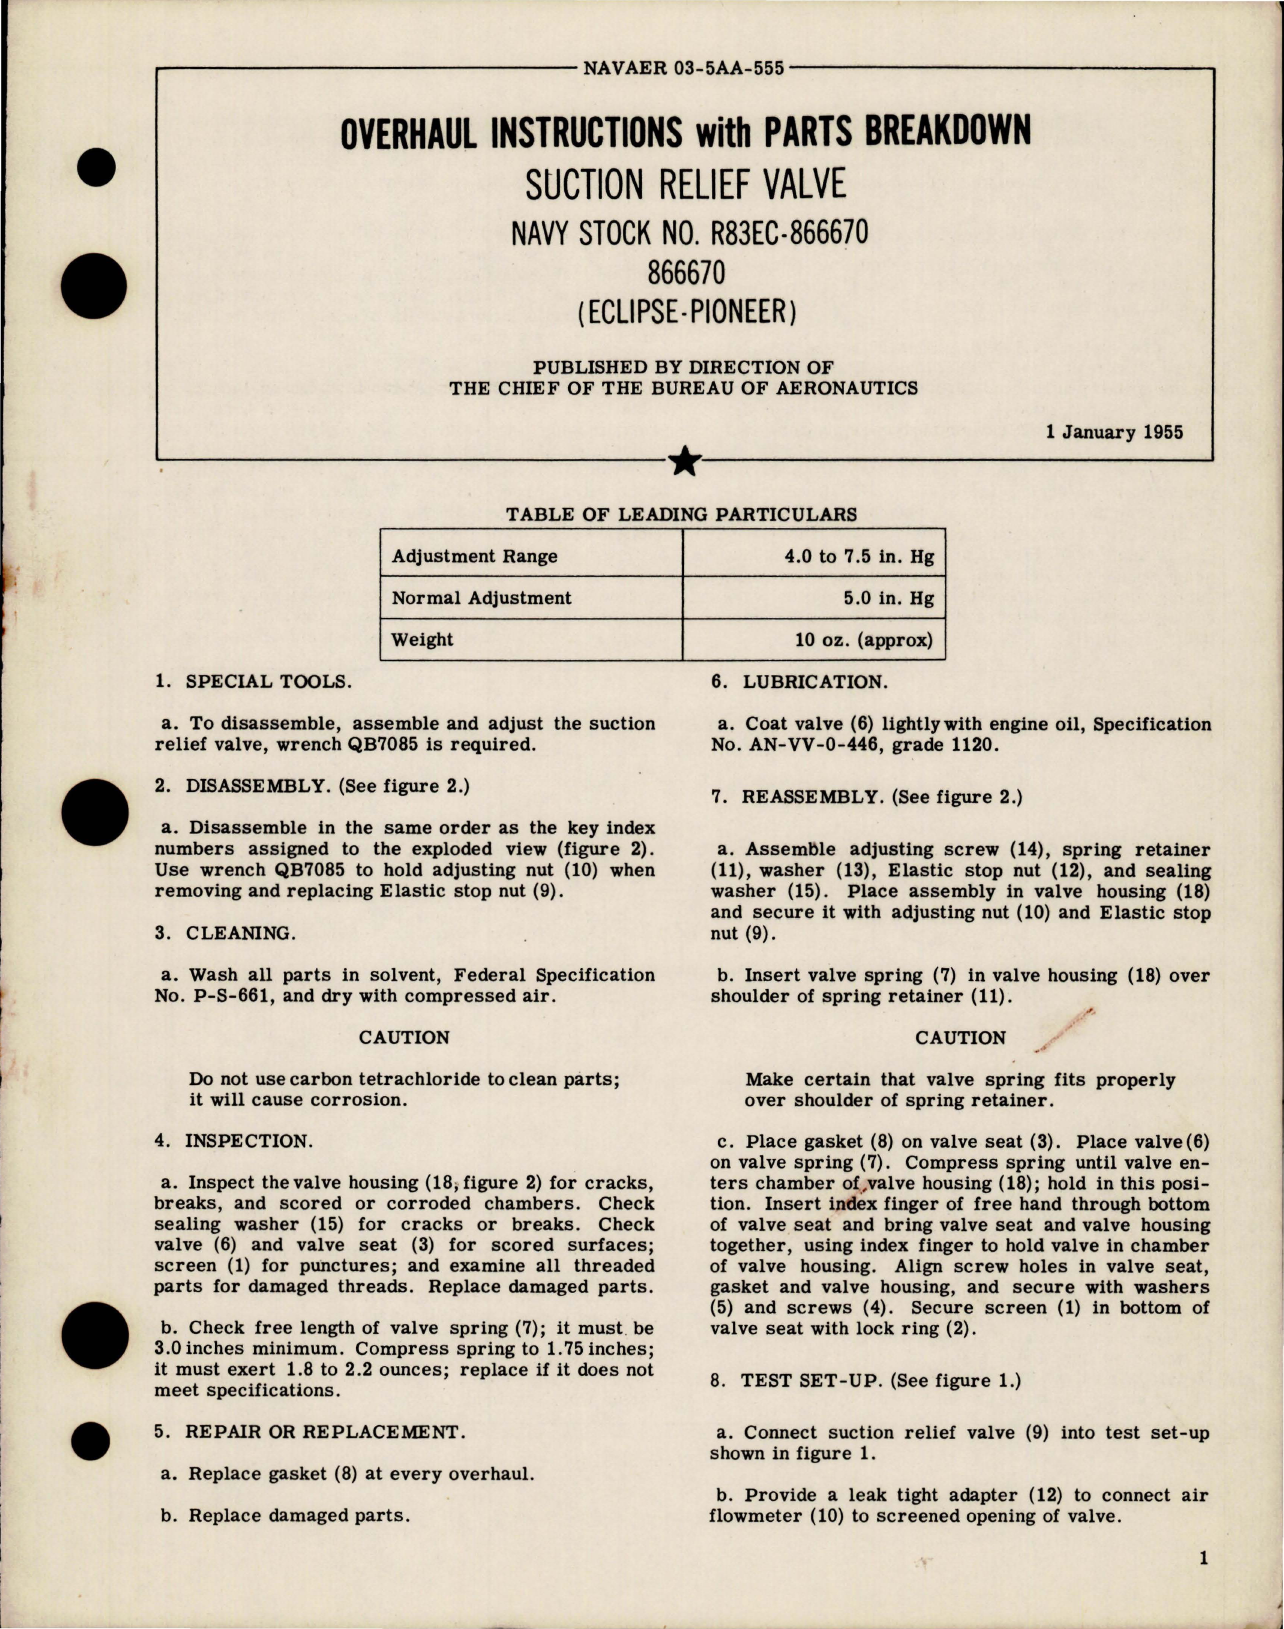 Sample page 1 from AirCorps Library document: Overhaul Instructions with Parts for Suction Relief Valve - 866670 